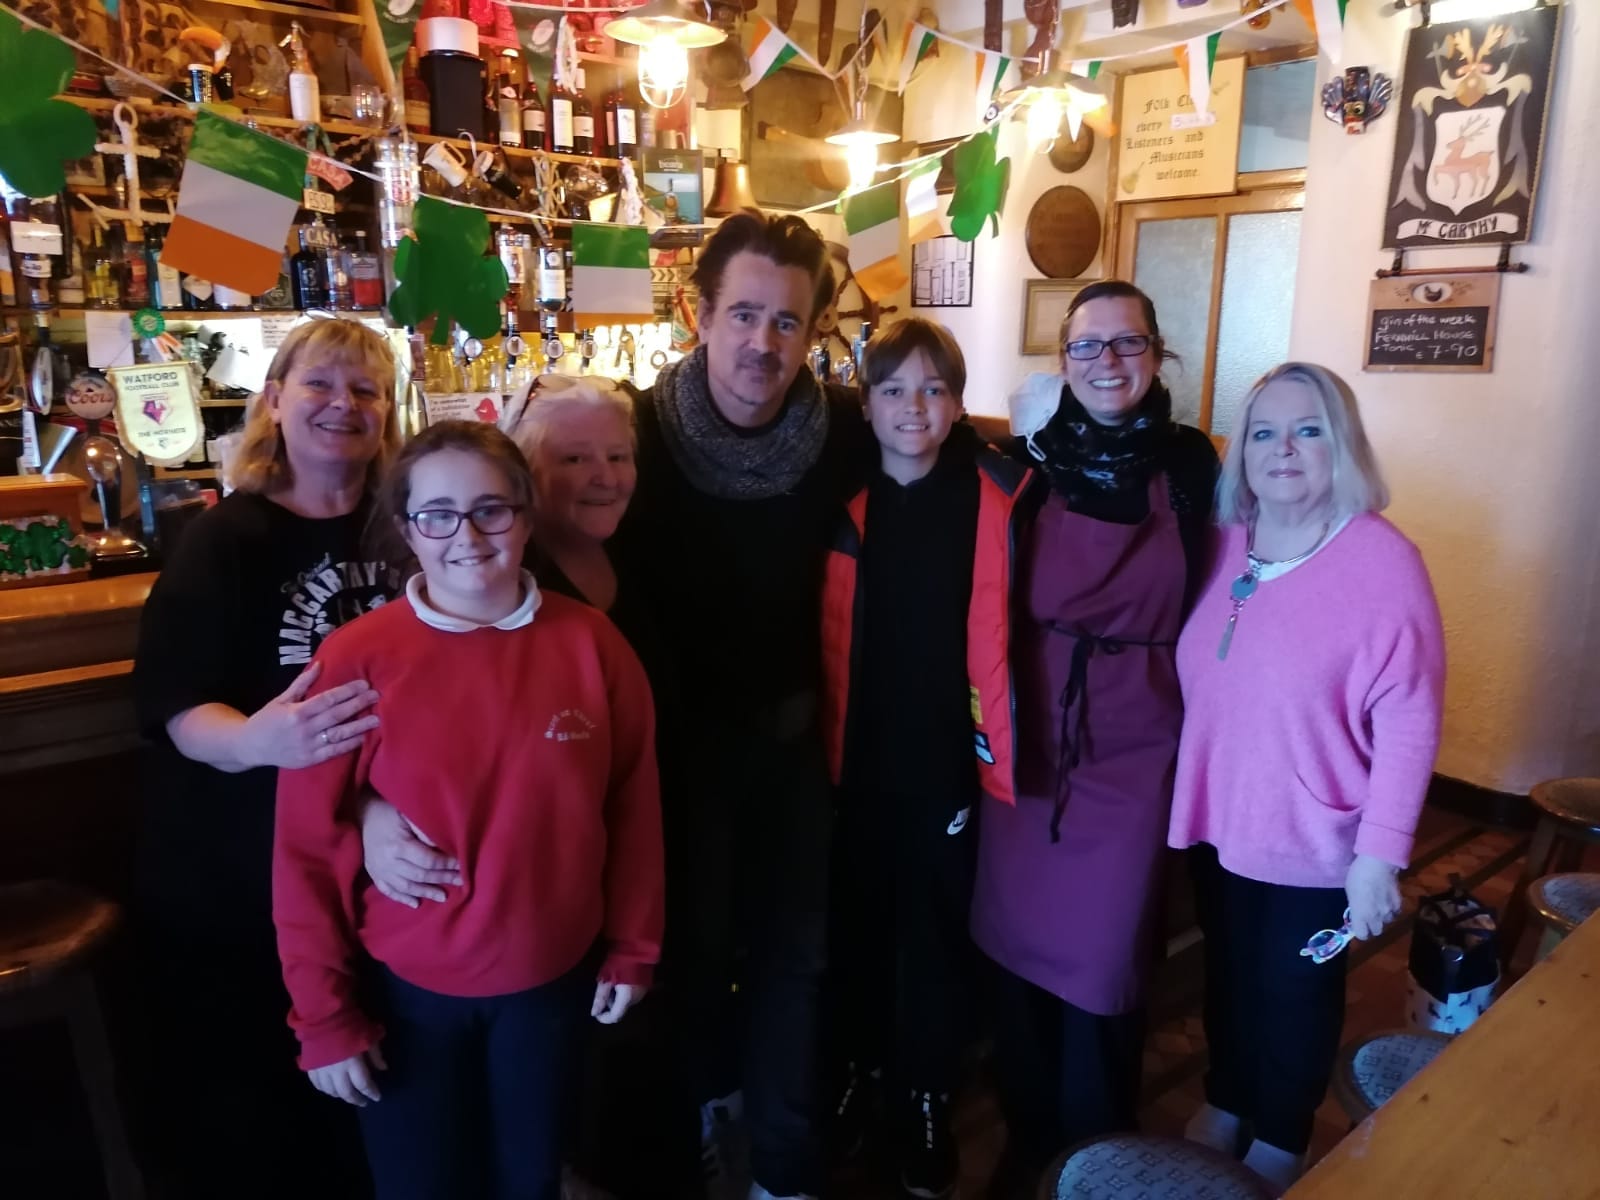 Colin Farrell visits MacCarthy's Bar in Castletownbere, Co Cork with his son in March 2022